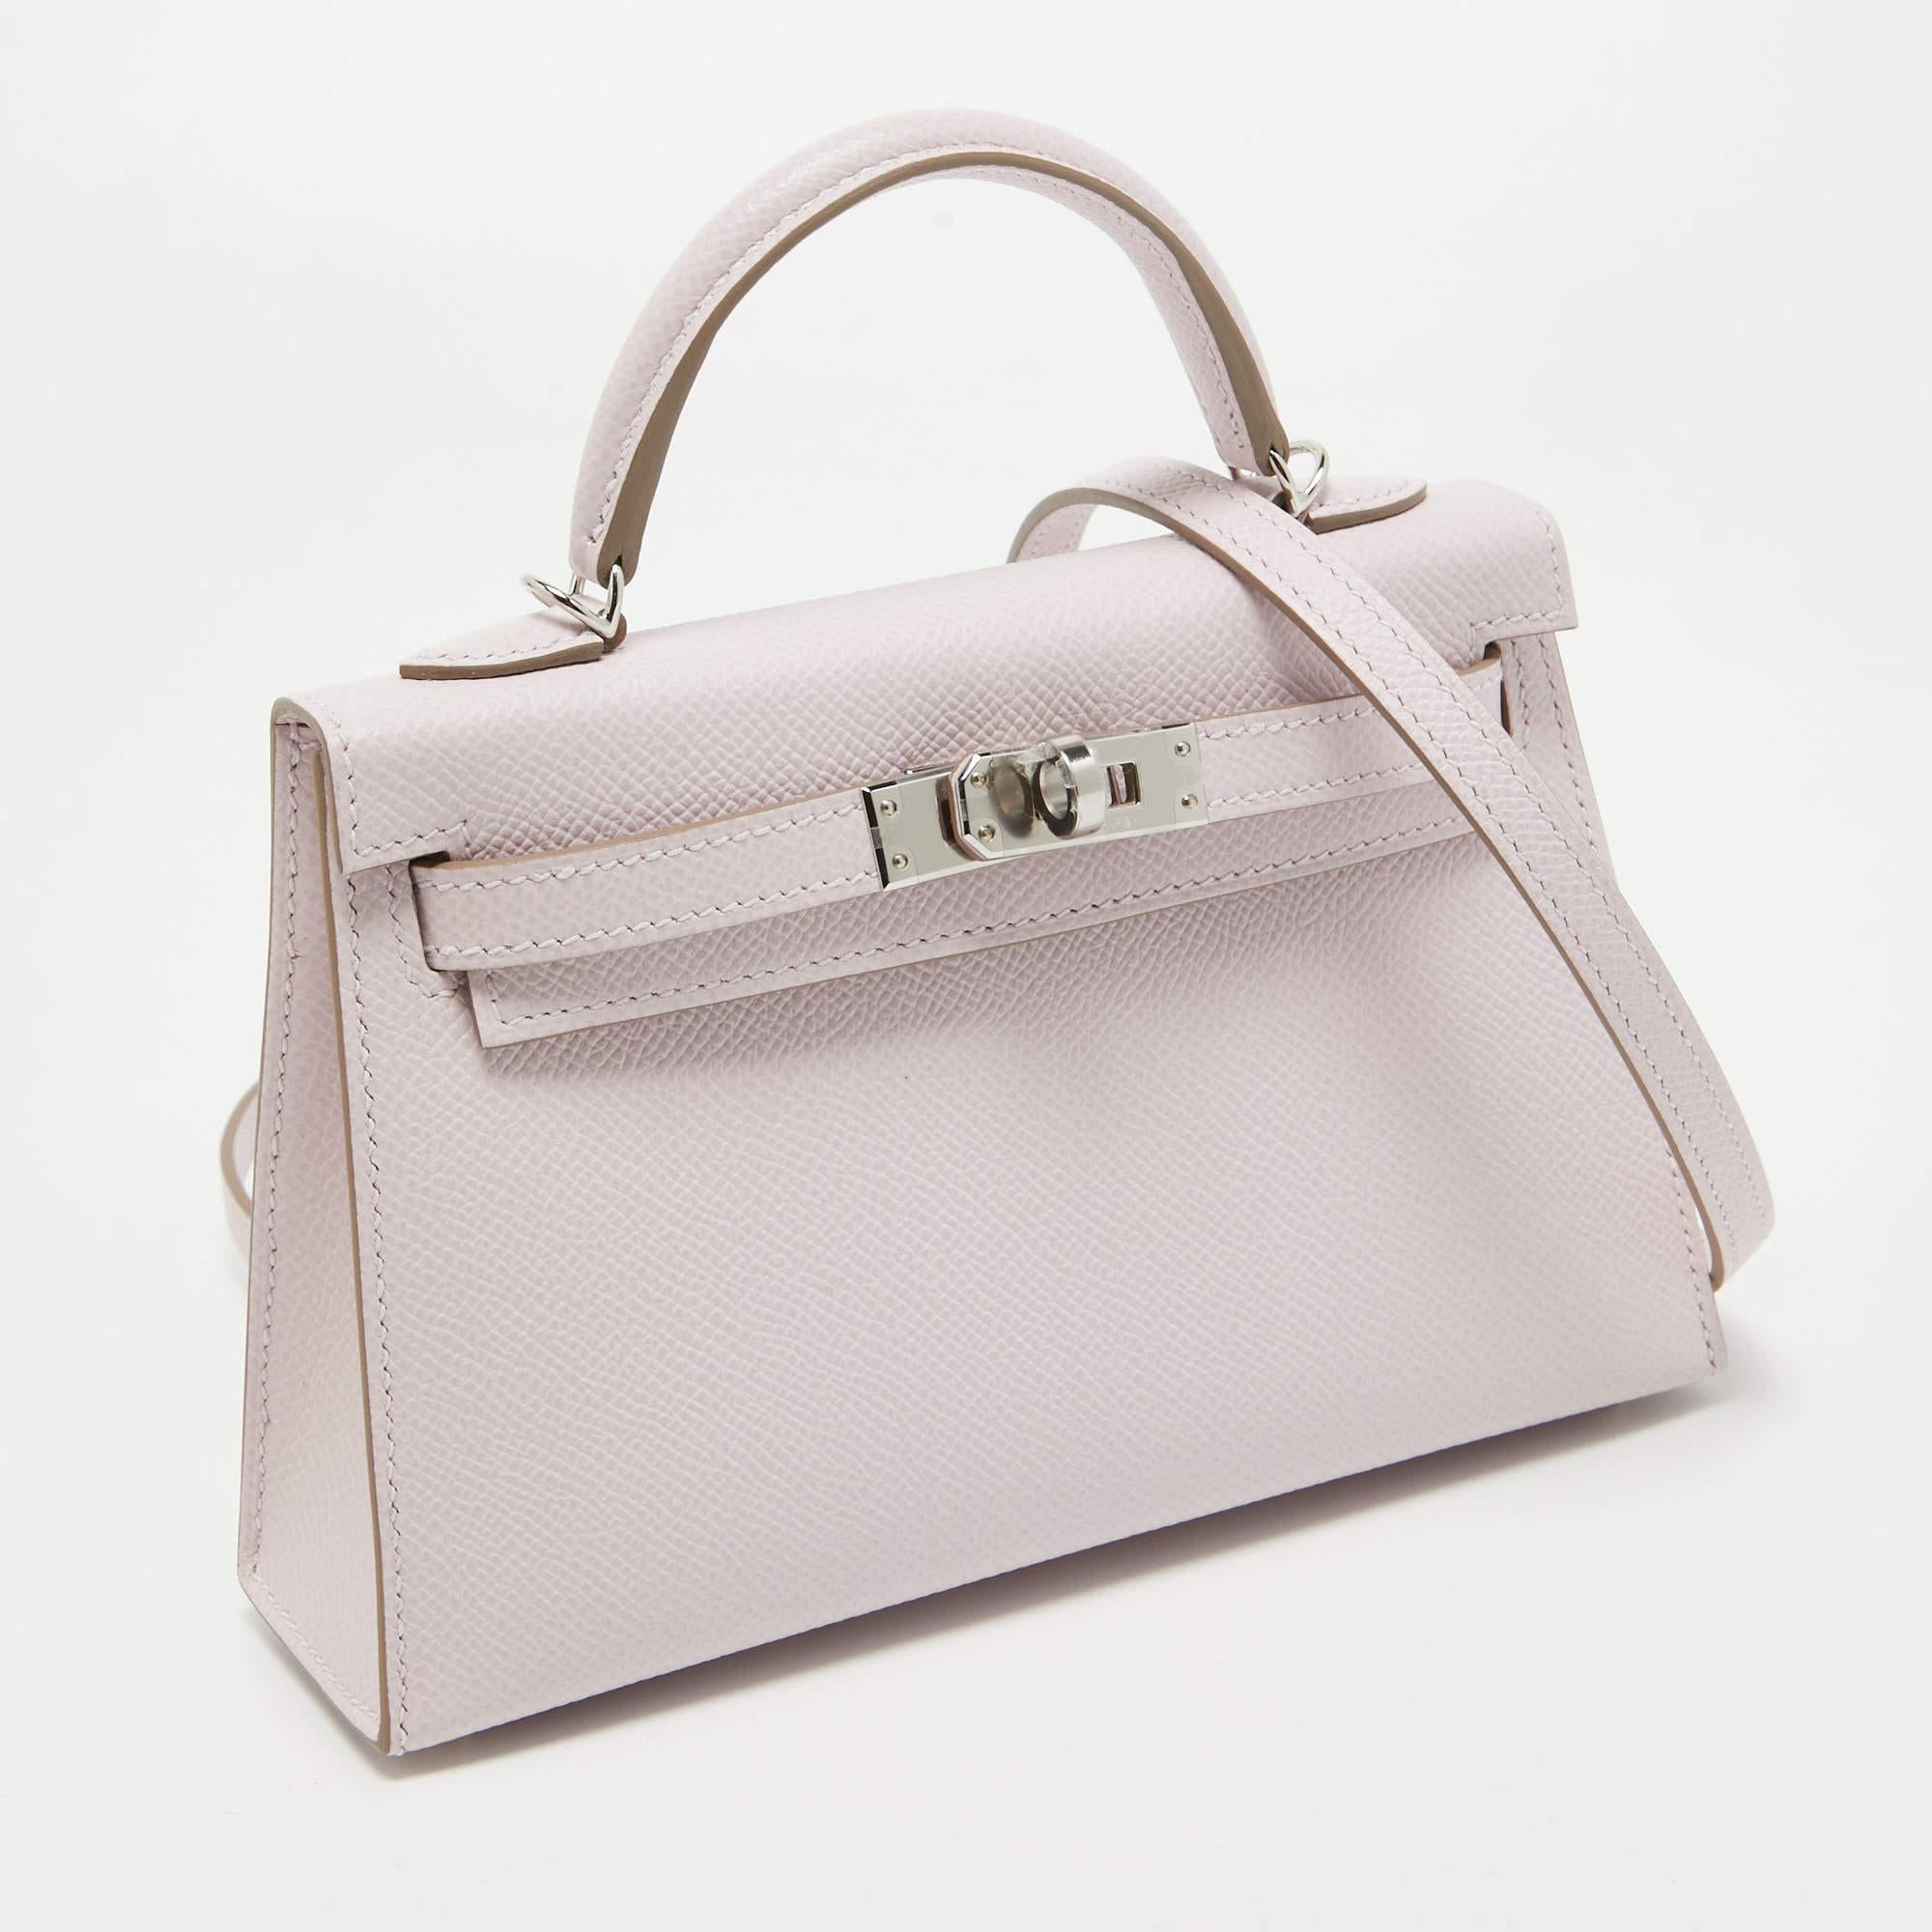 The covetable Hermès mini Kelly Sellier II Bag exudes timeless elegance. Crafted from exquisite Epsom leather in a soft mauve hue, the bag features the iconic Kelly Sellier silhouette with palladium finish hardware. Its compact size adds